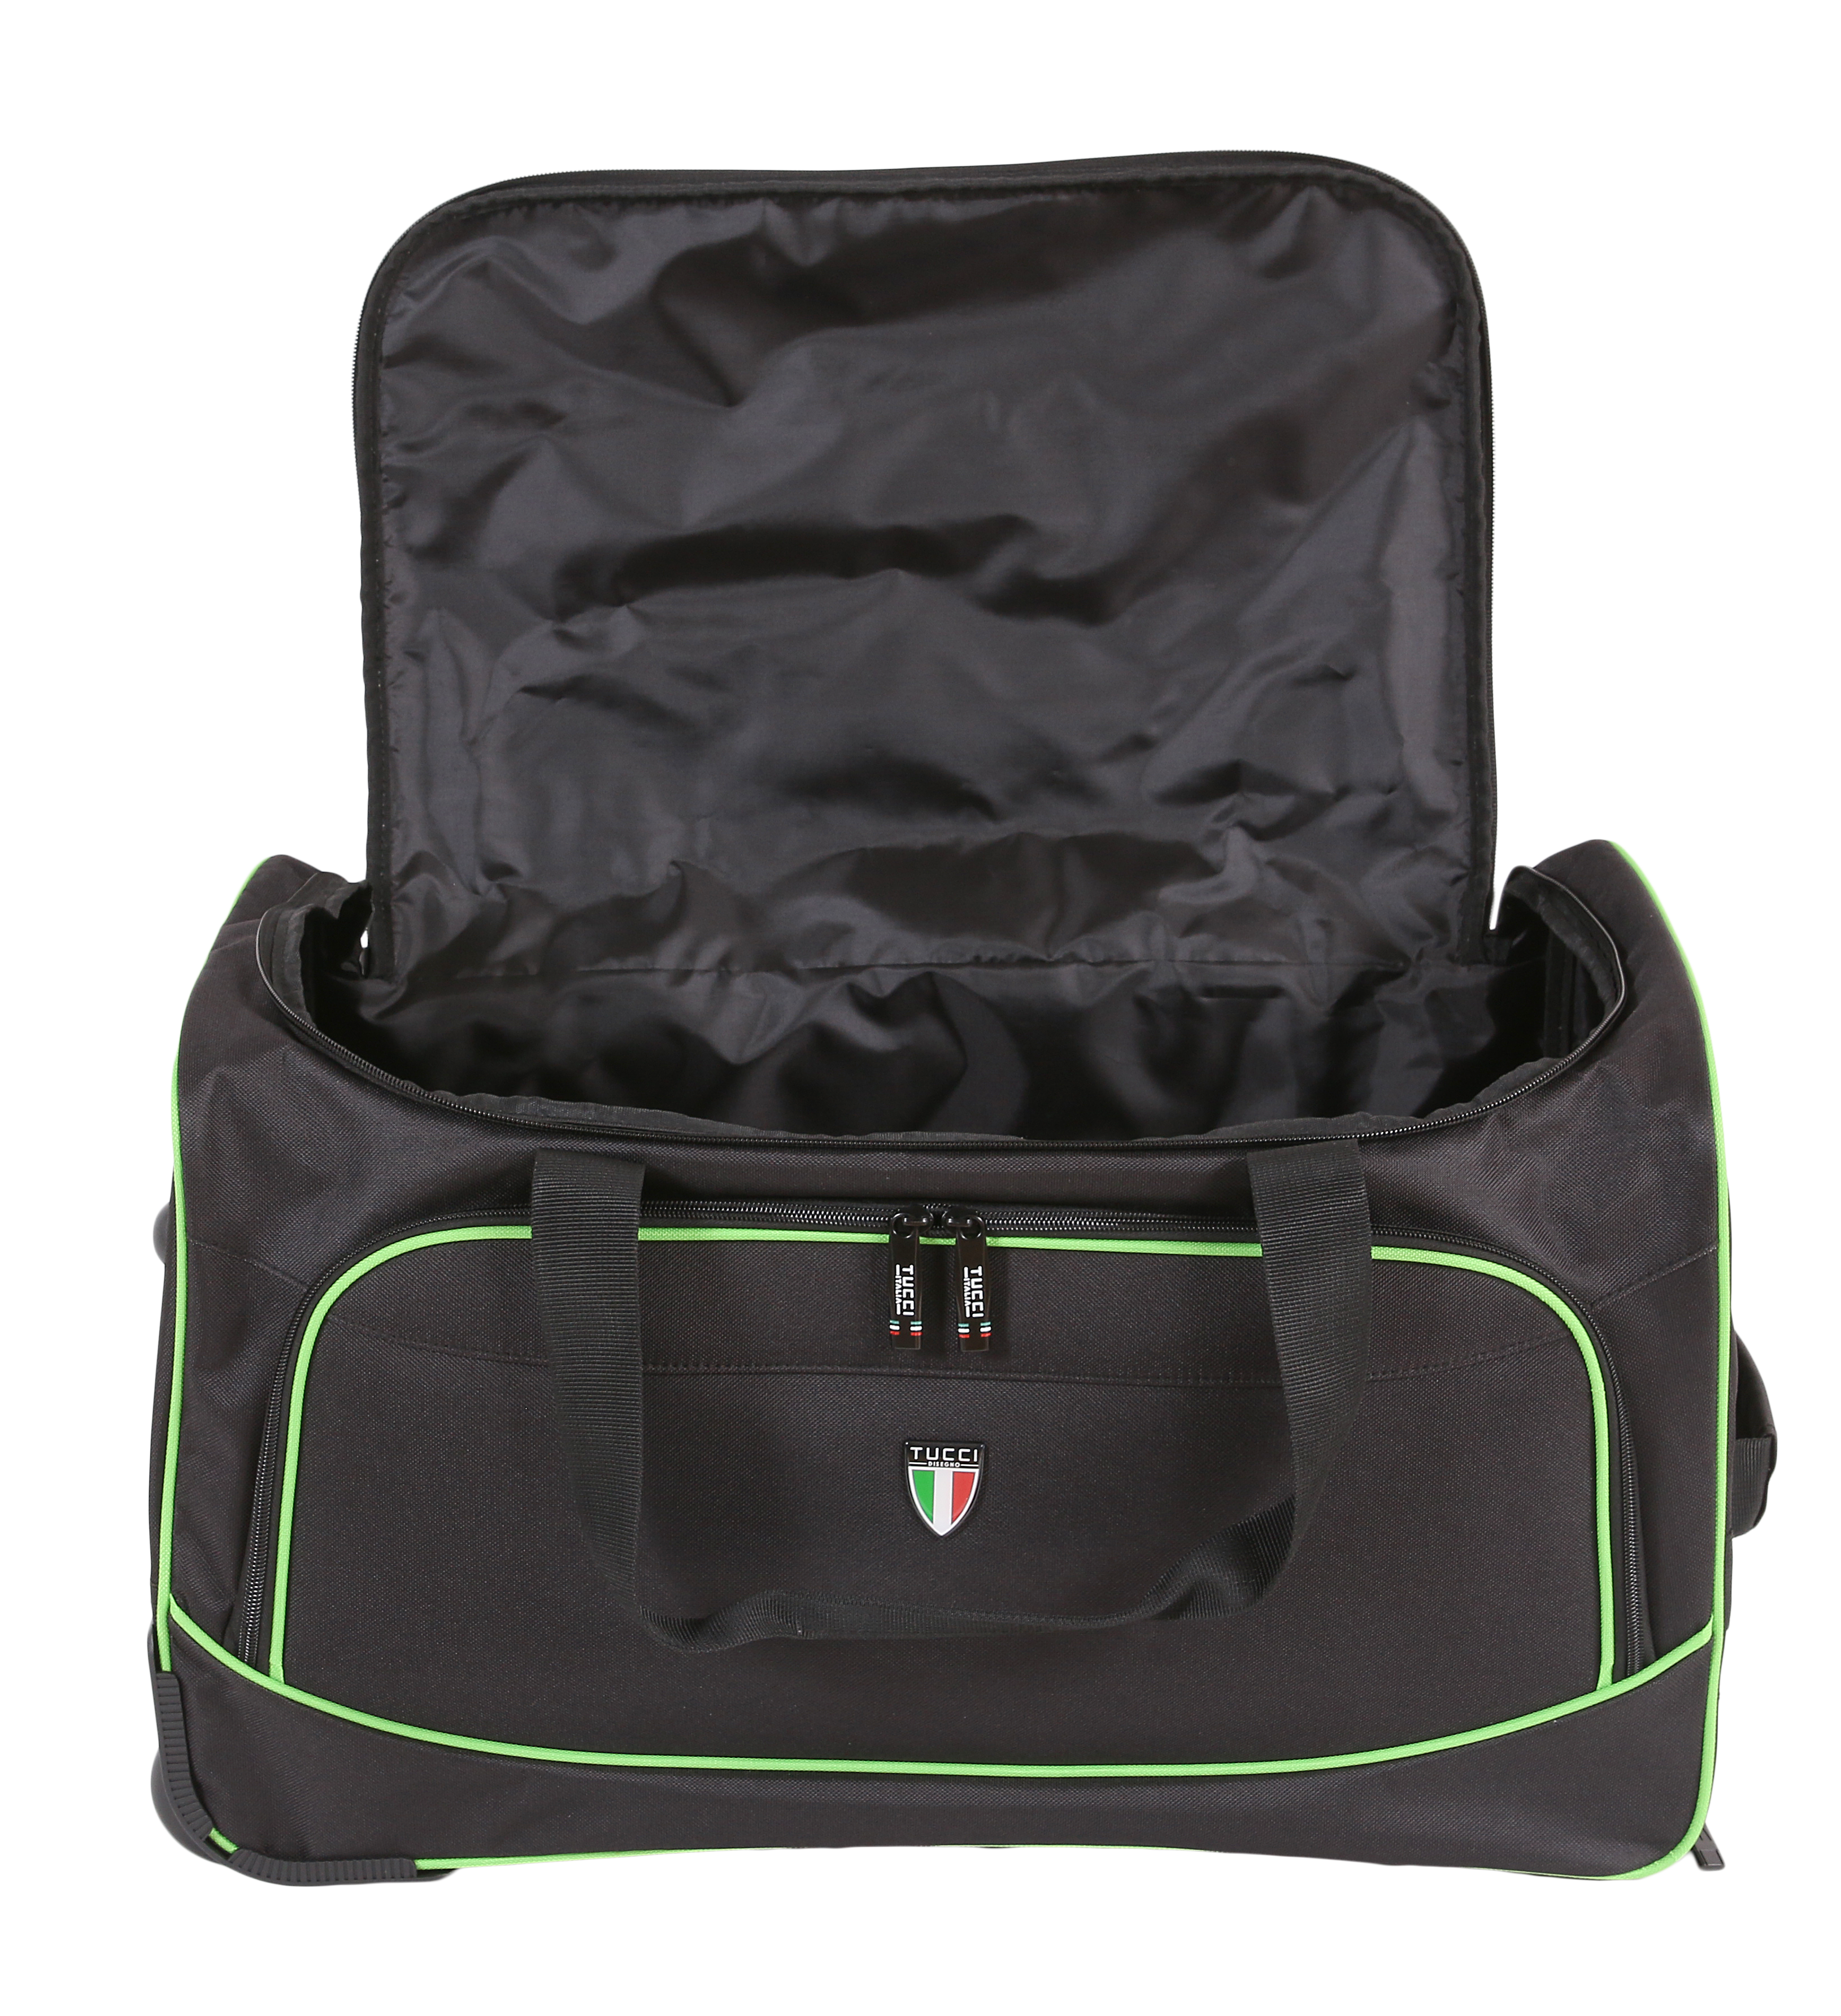 Tucci Italy - AMICO - Rolling Duffel Bag Collection - 22 INCH